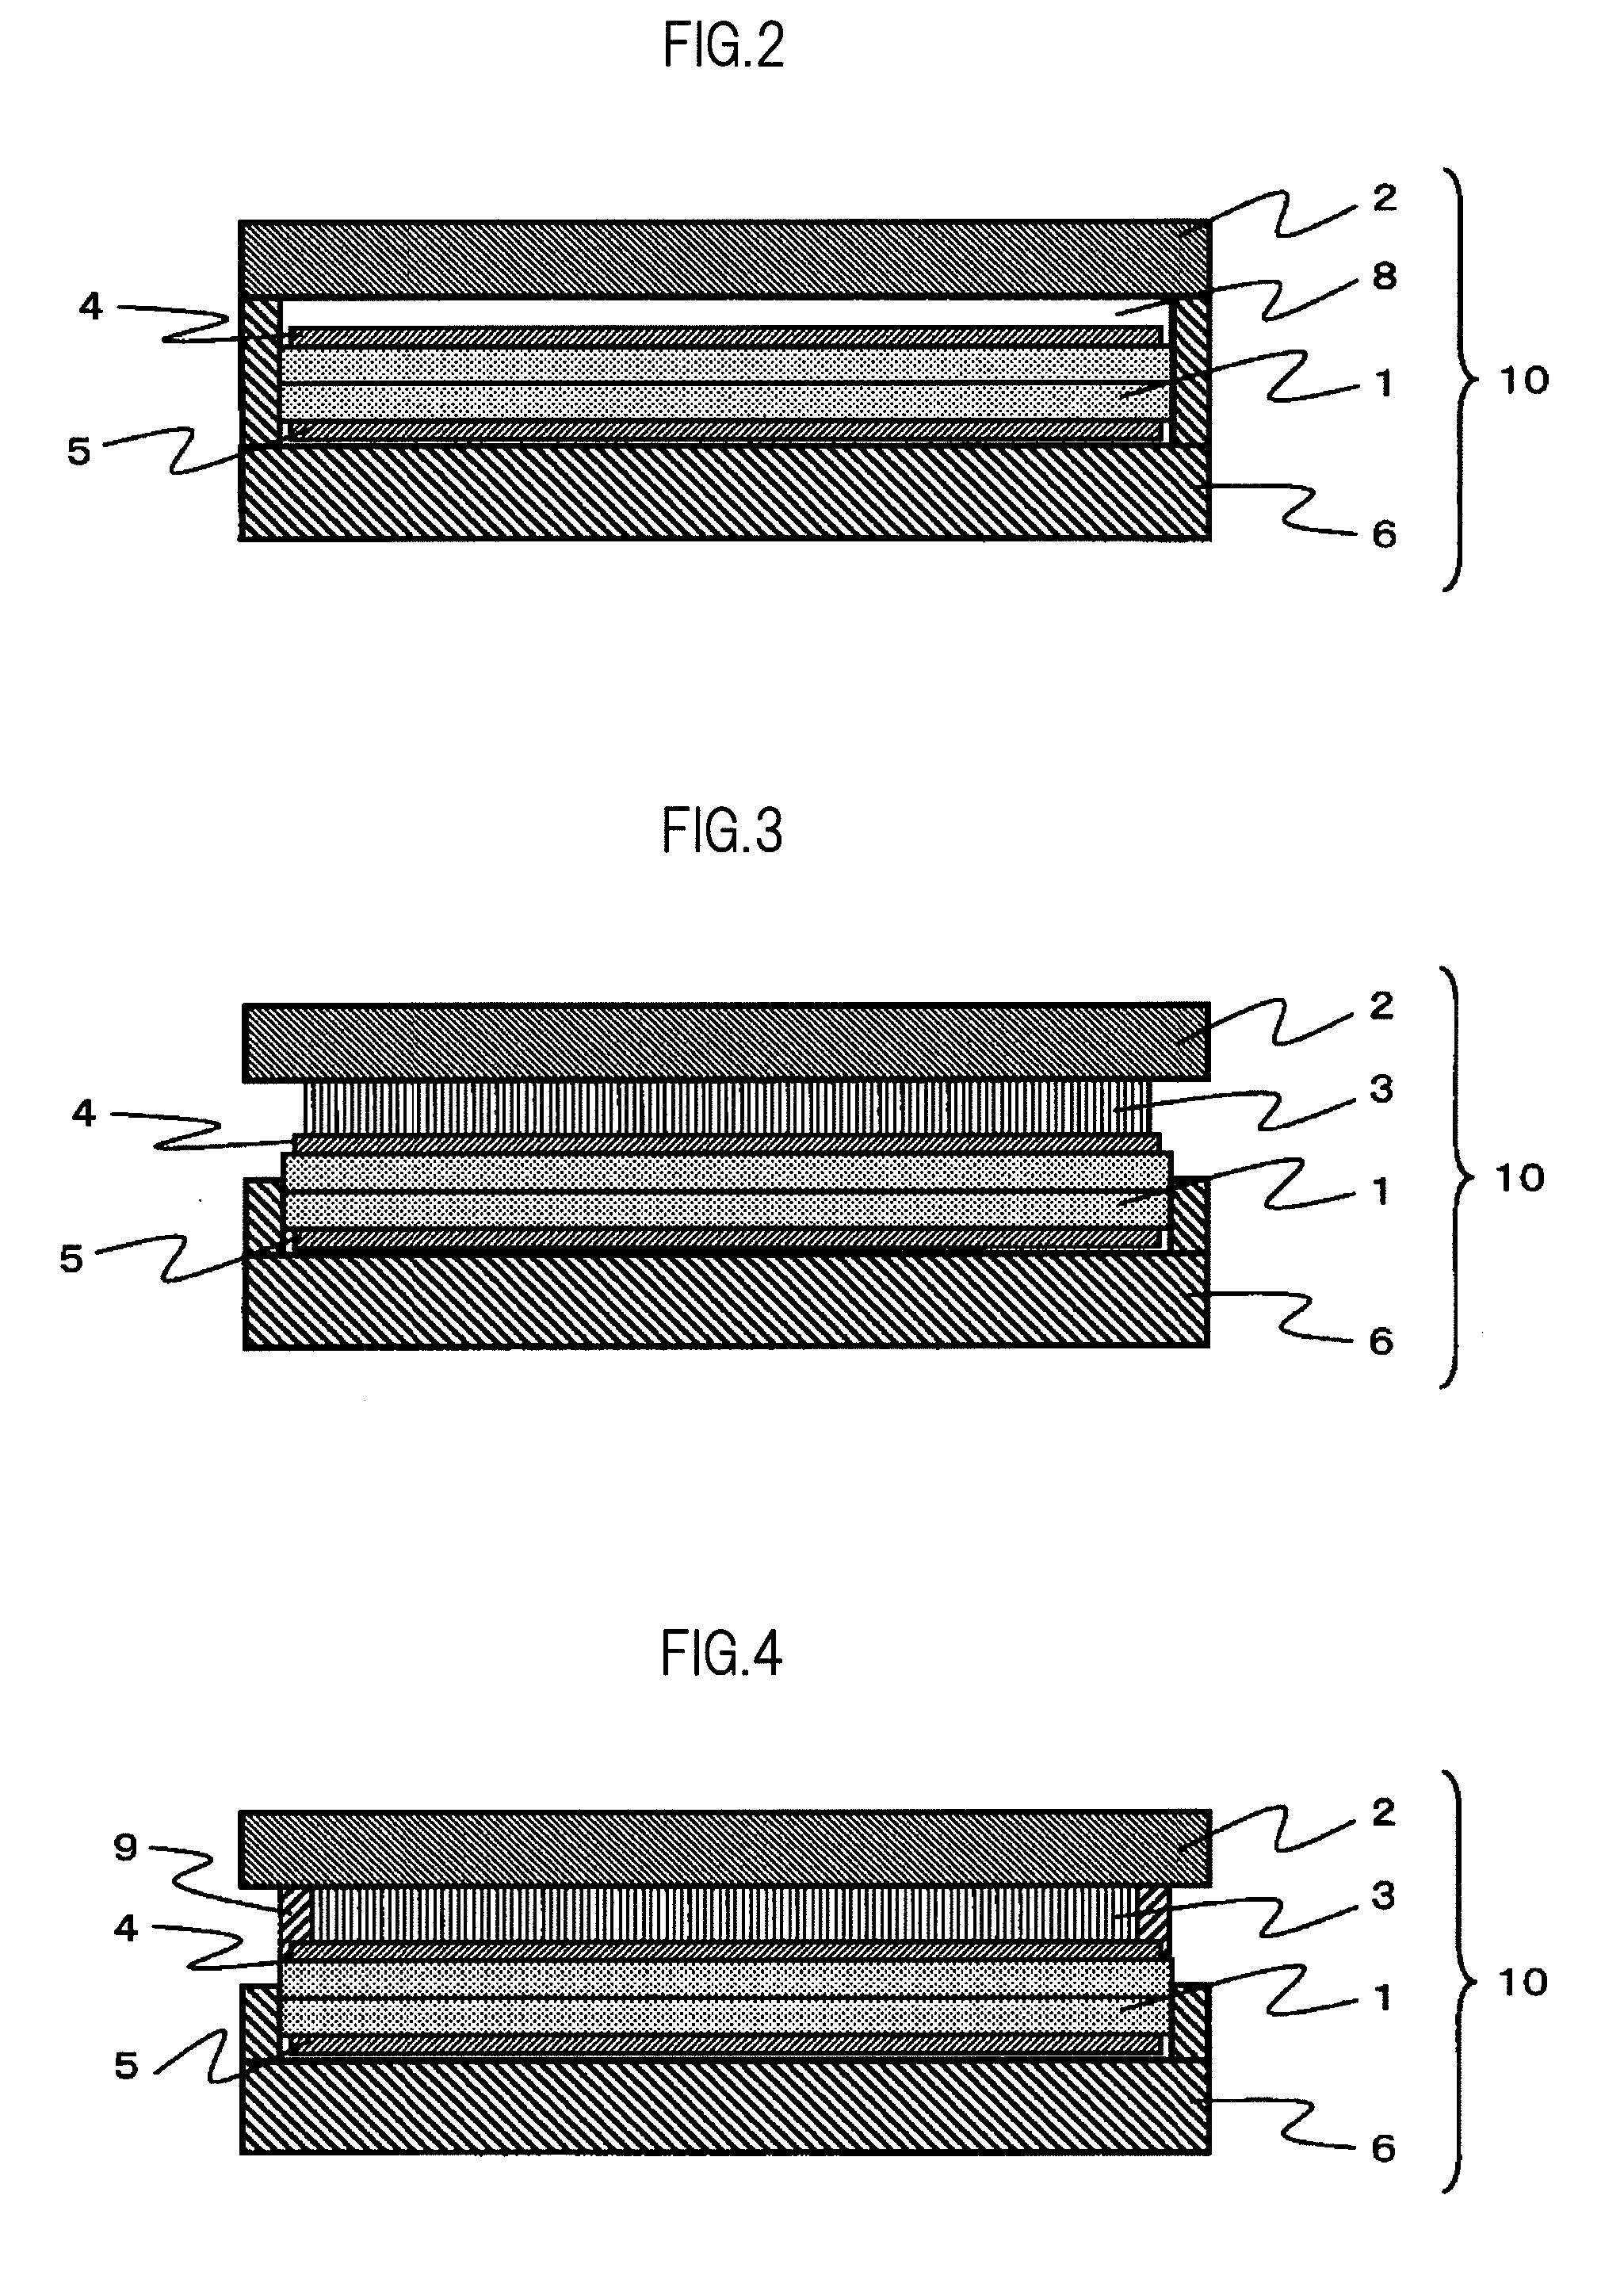 Method of manufacturing a display